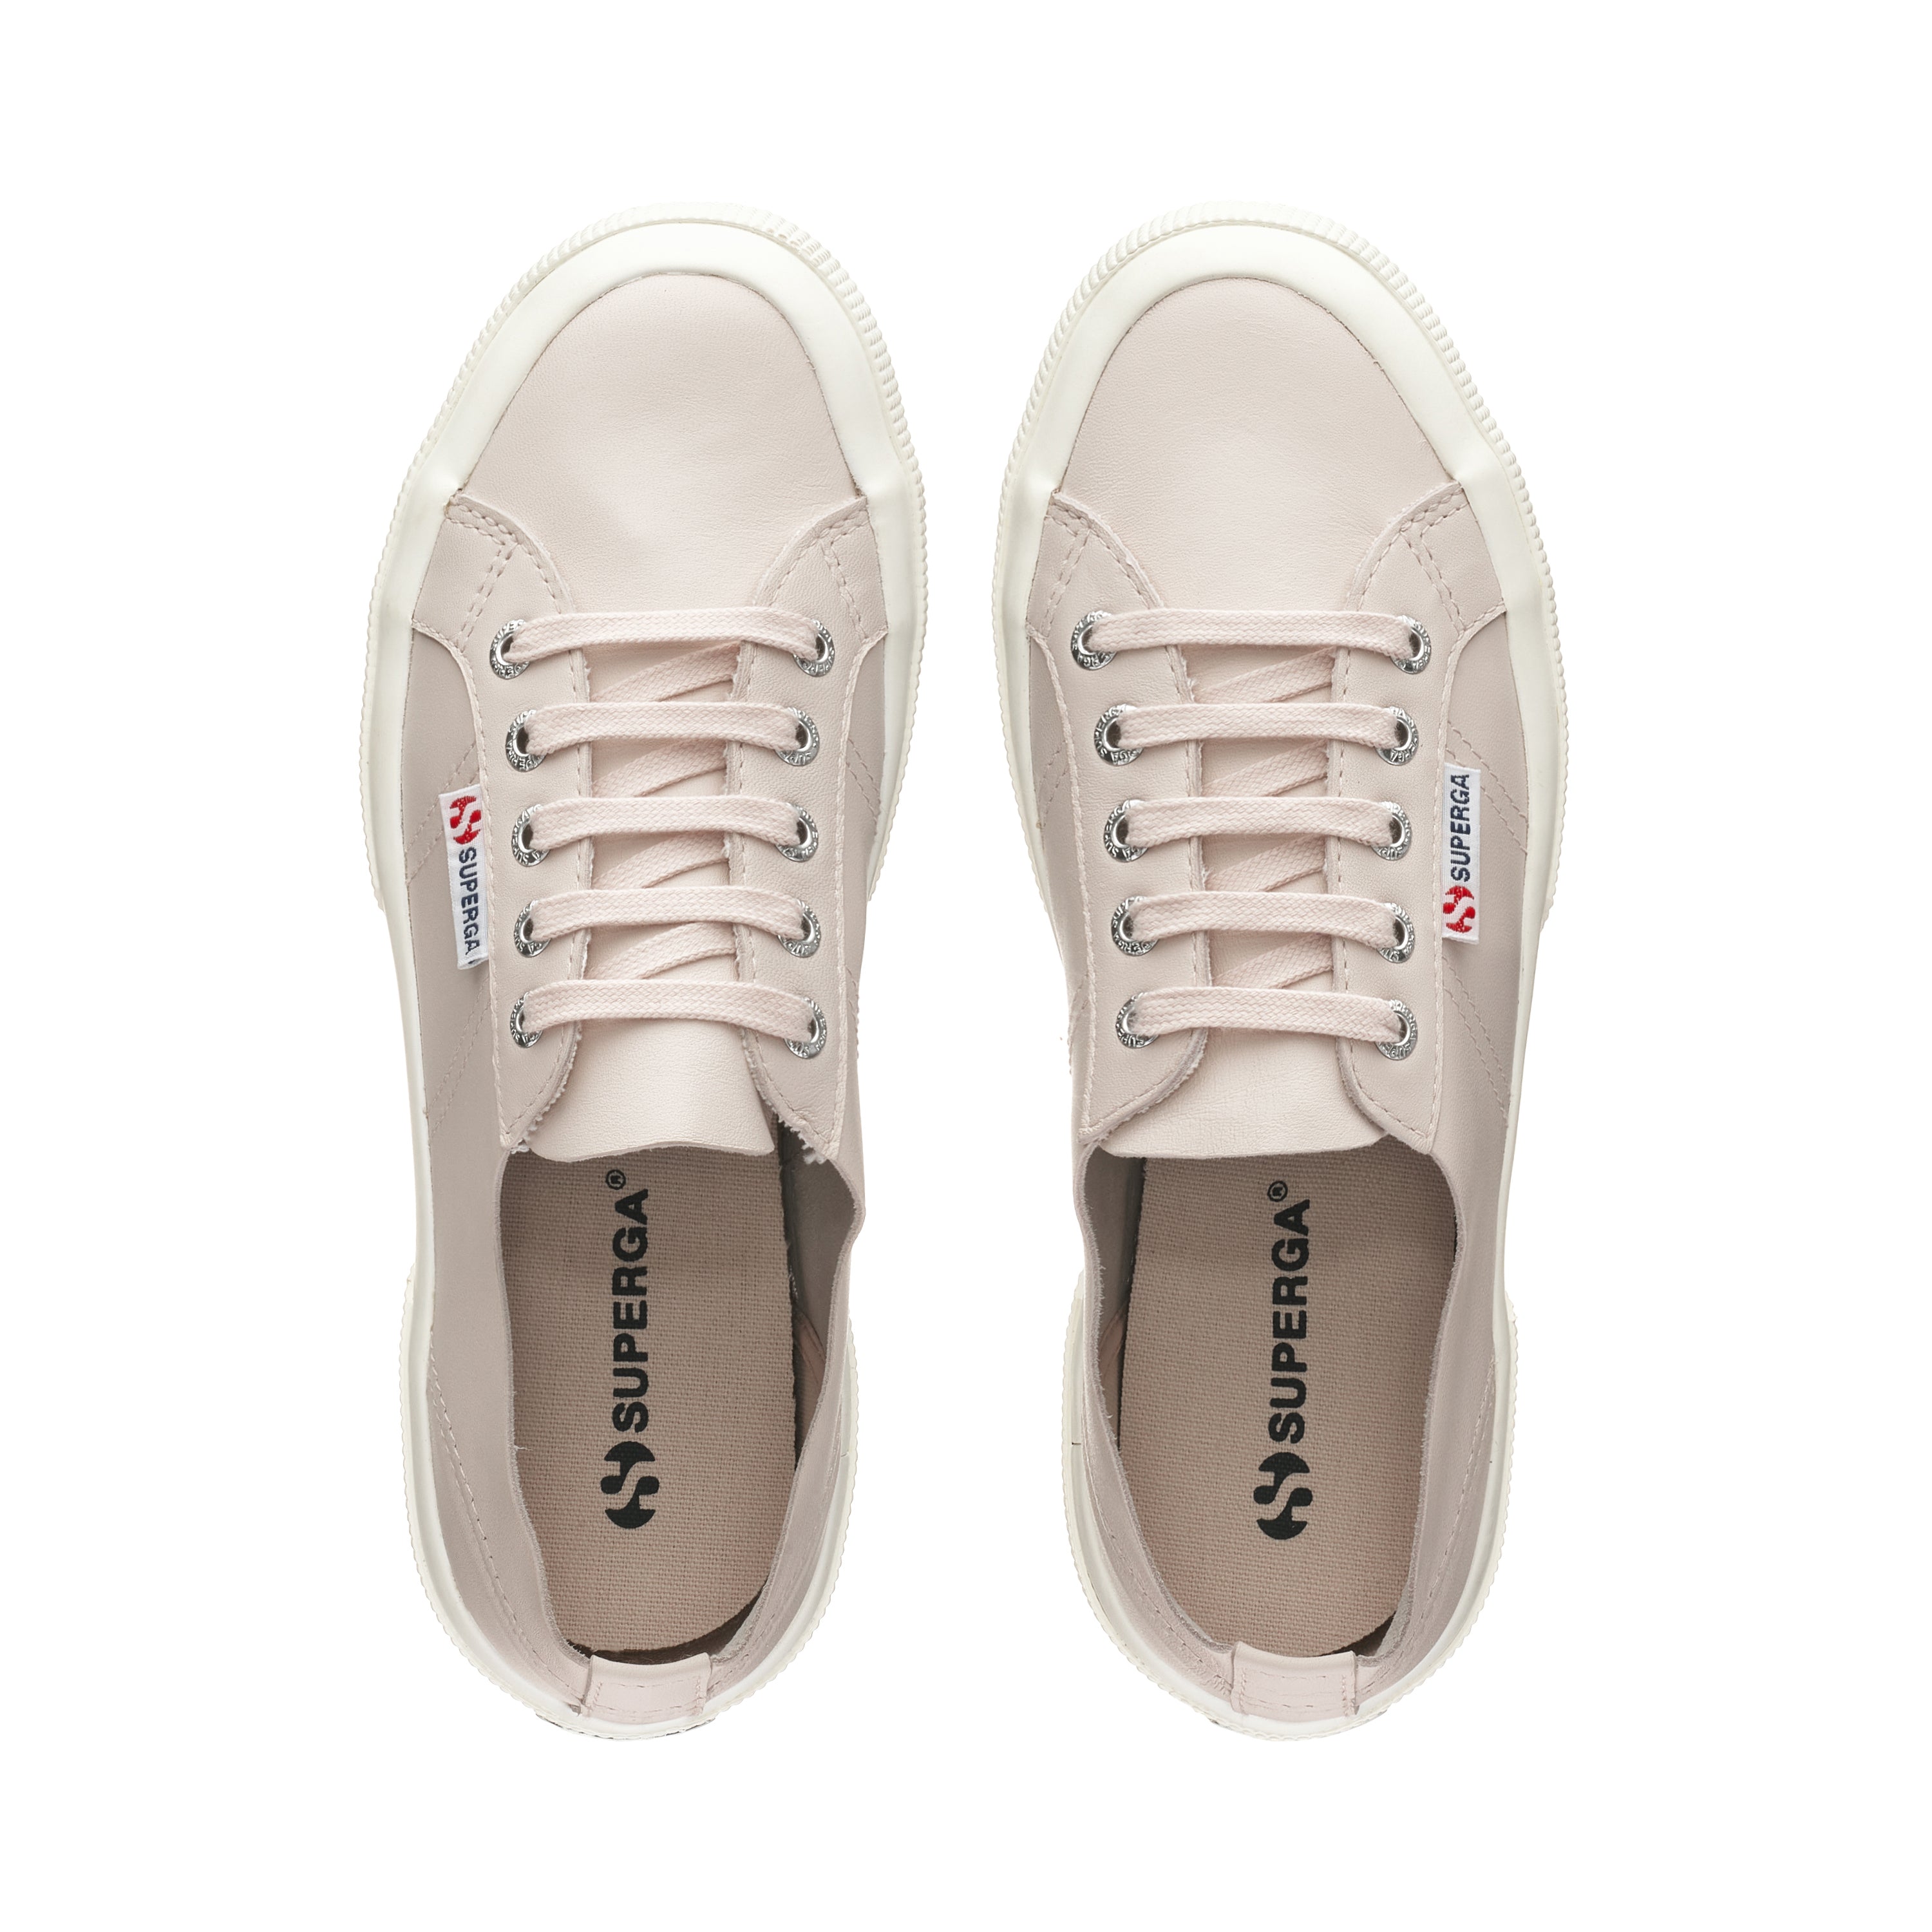 Superga 2750 Unlined Nappa Sneakers - Light Pink. Top view.